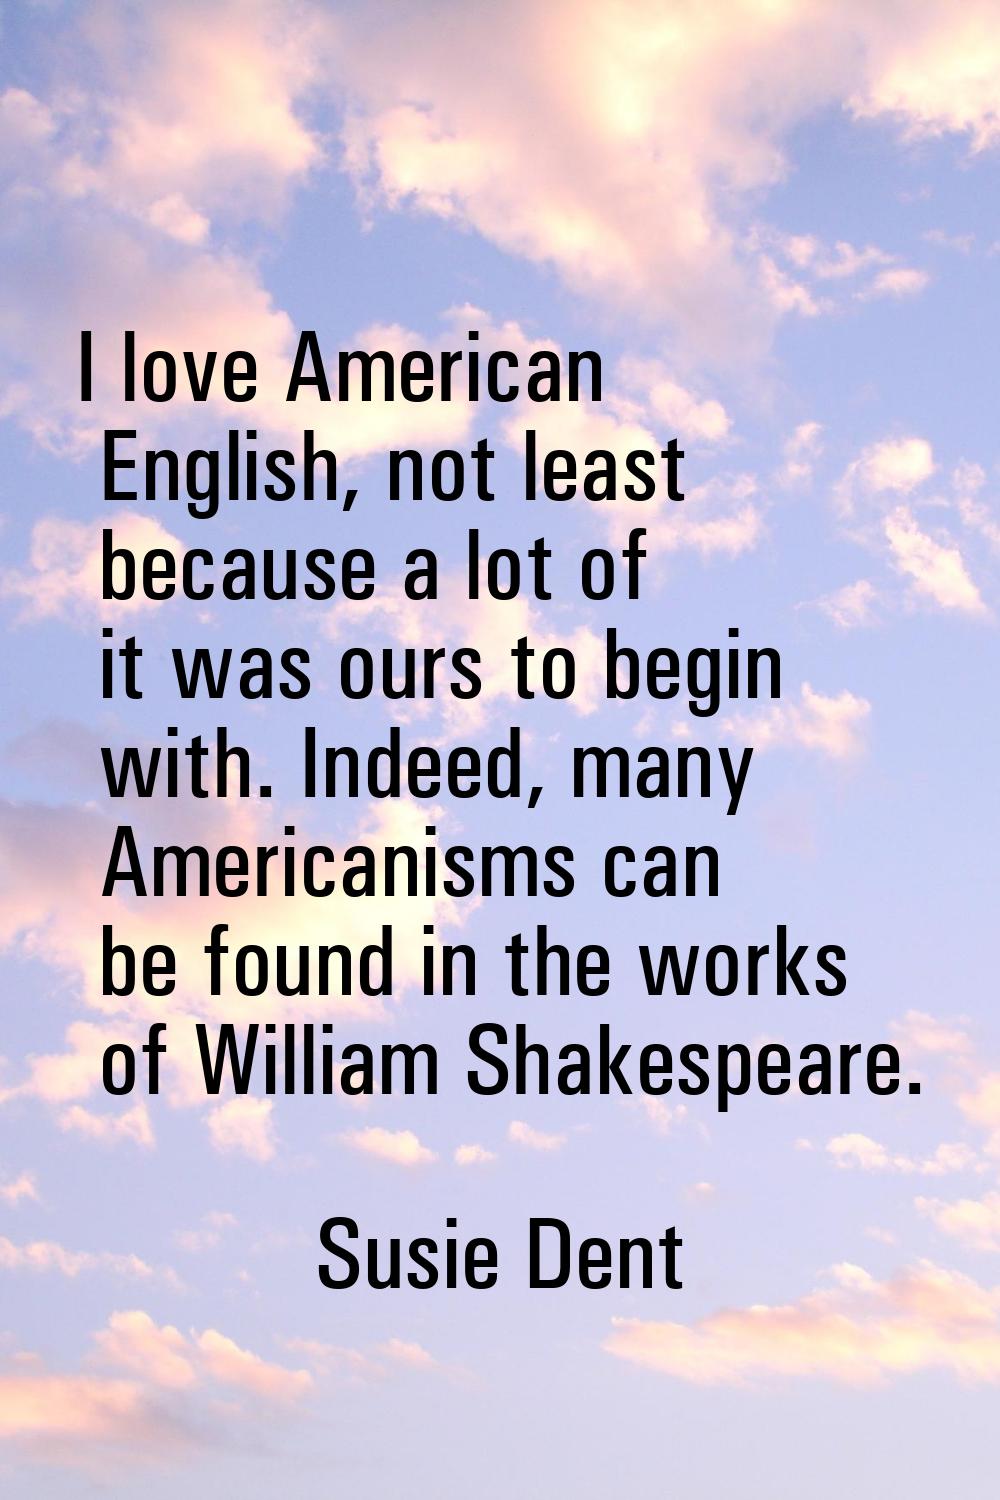 I love American English, not least because a lot of it was ours to begin with. Indeed, many America